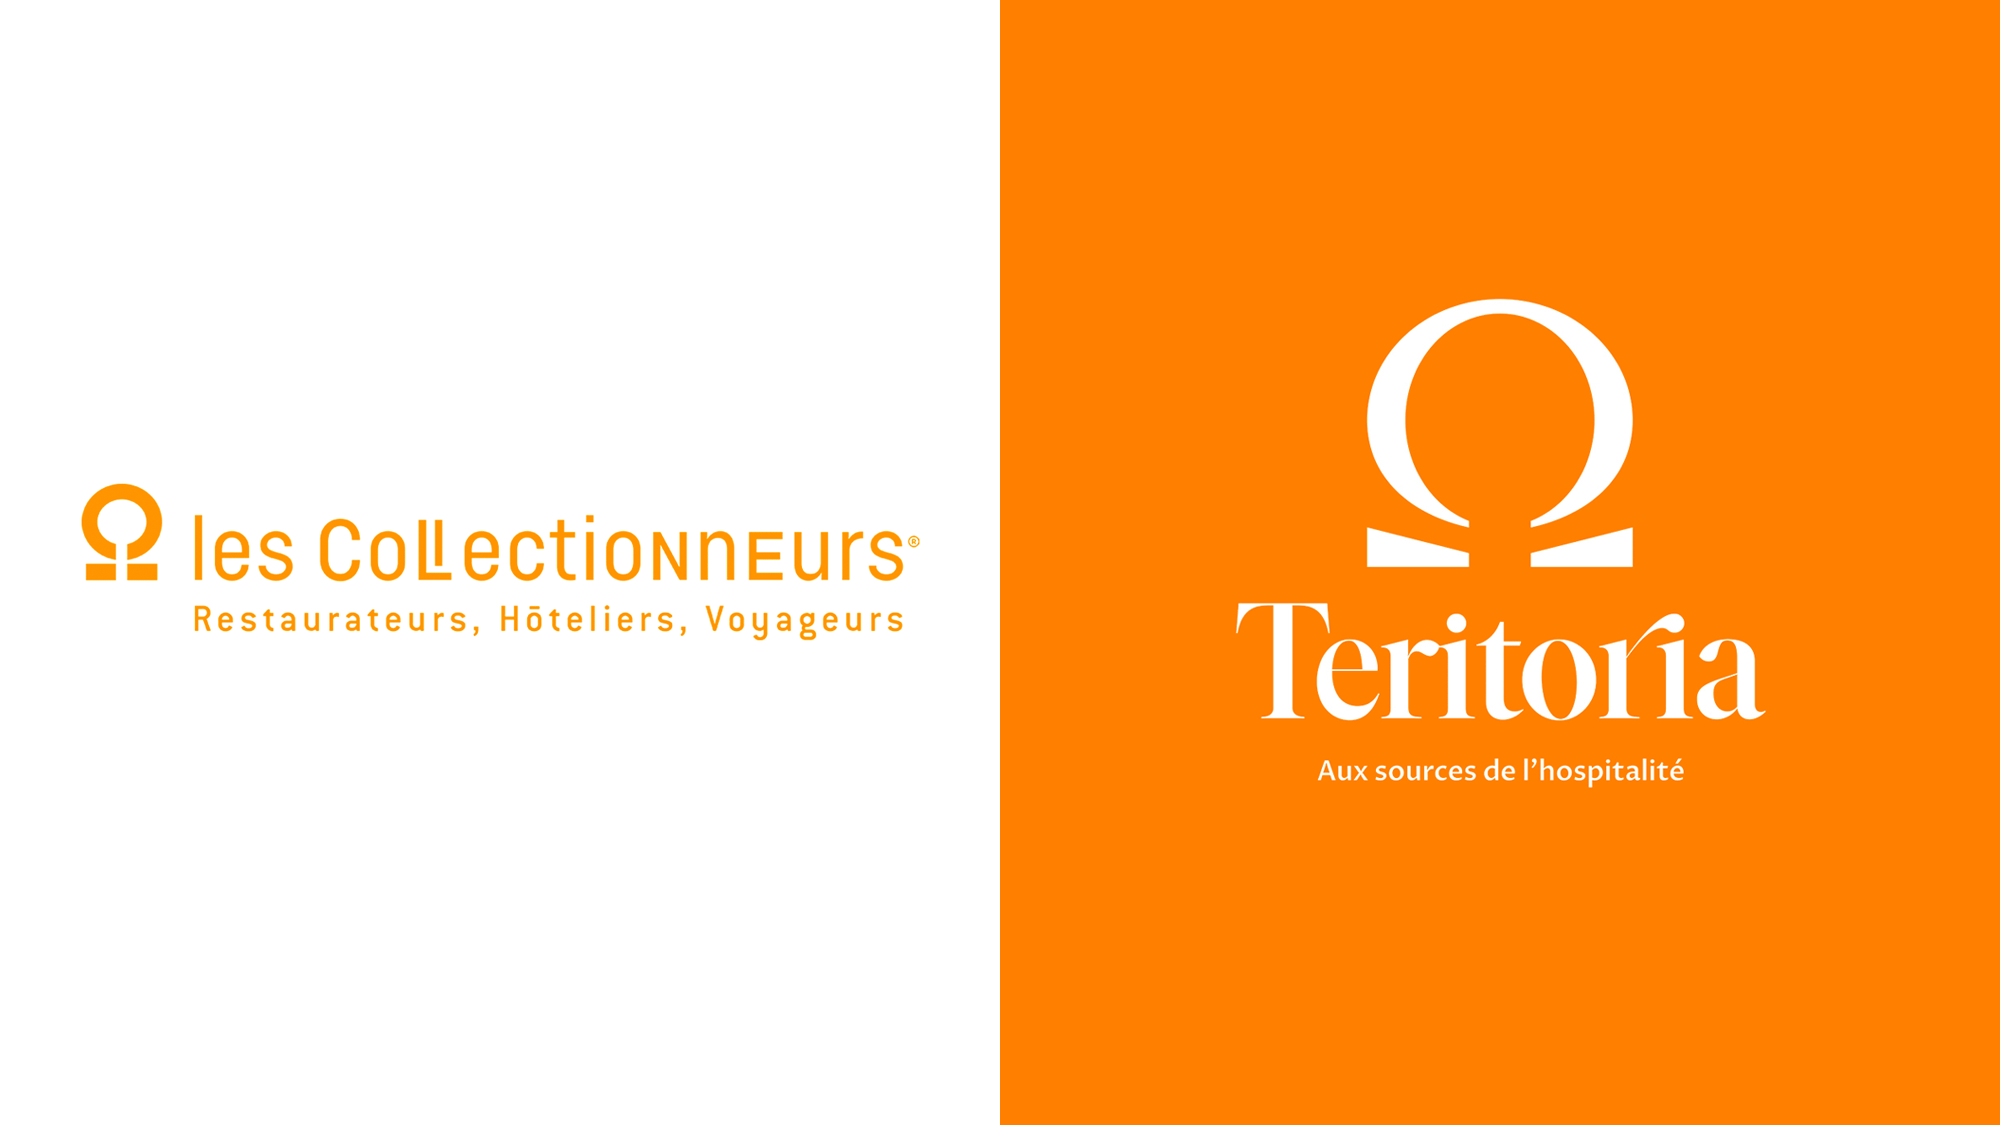 New Logo and Identity for Teritoria by LaPetiteGrosse